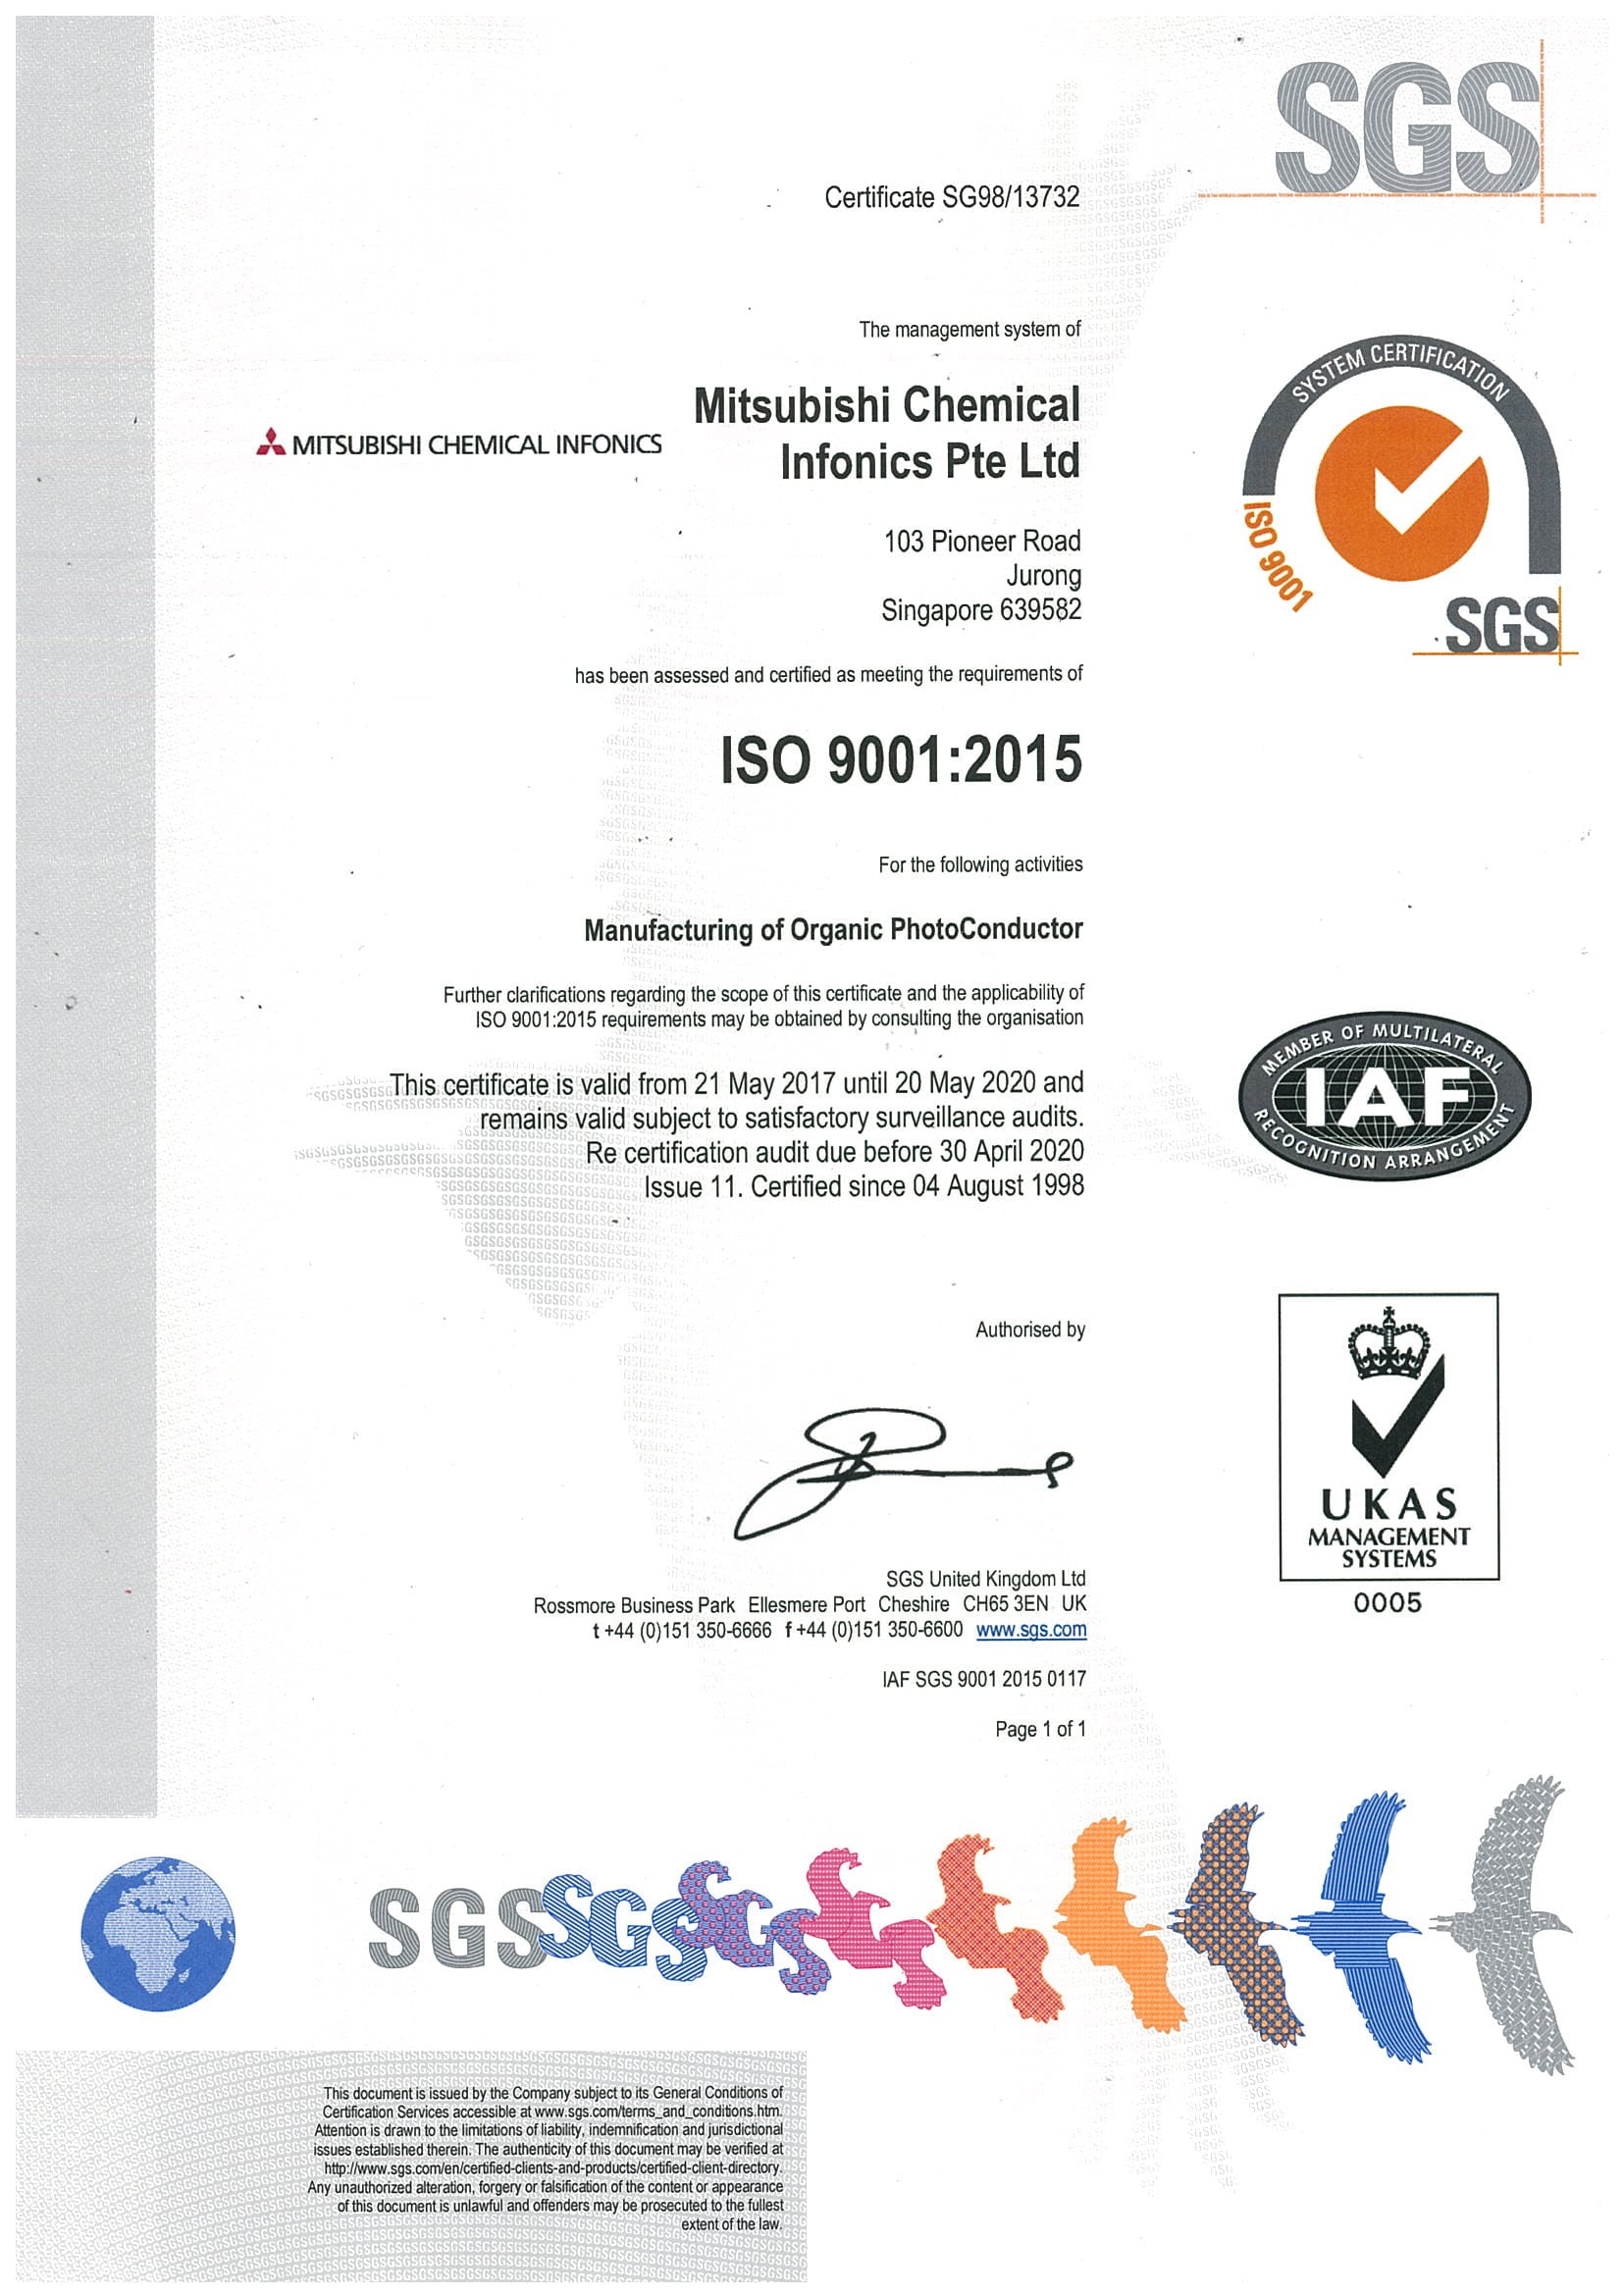 MCI_ISO 9001-2015　Certificate_Expired　20 May 2020-1.jpg